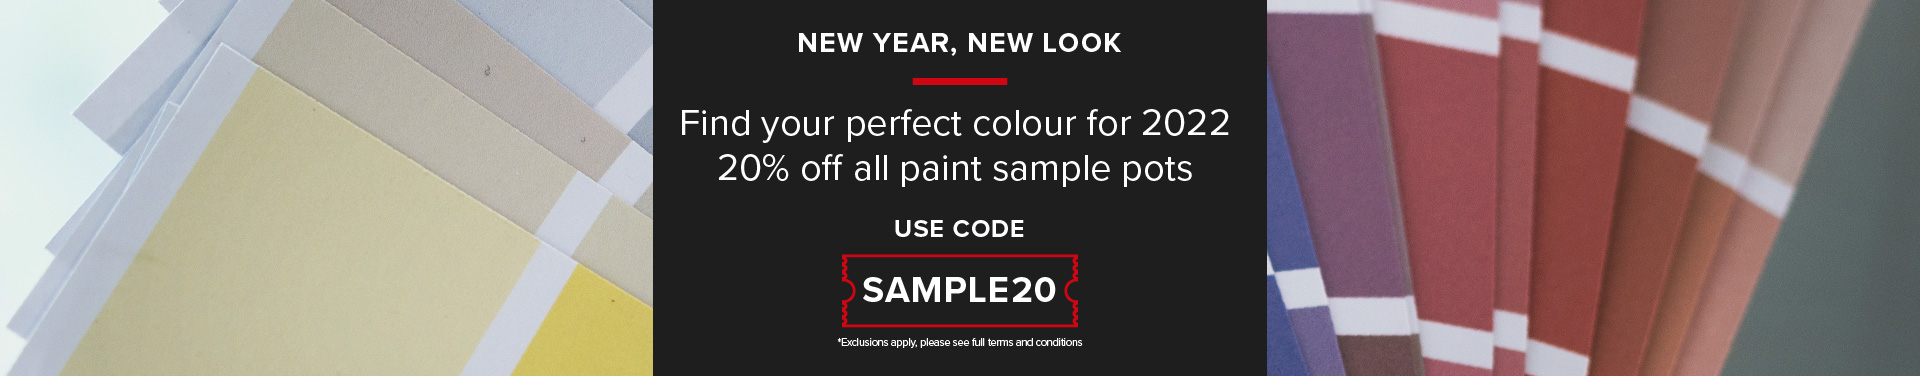 _7c-Paint_sample_offer-category_banner-1920x375_03